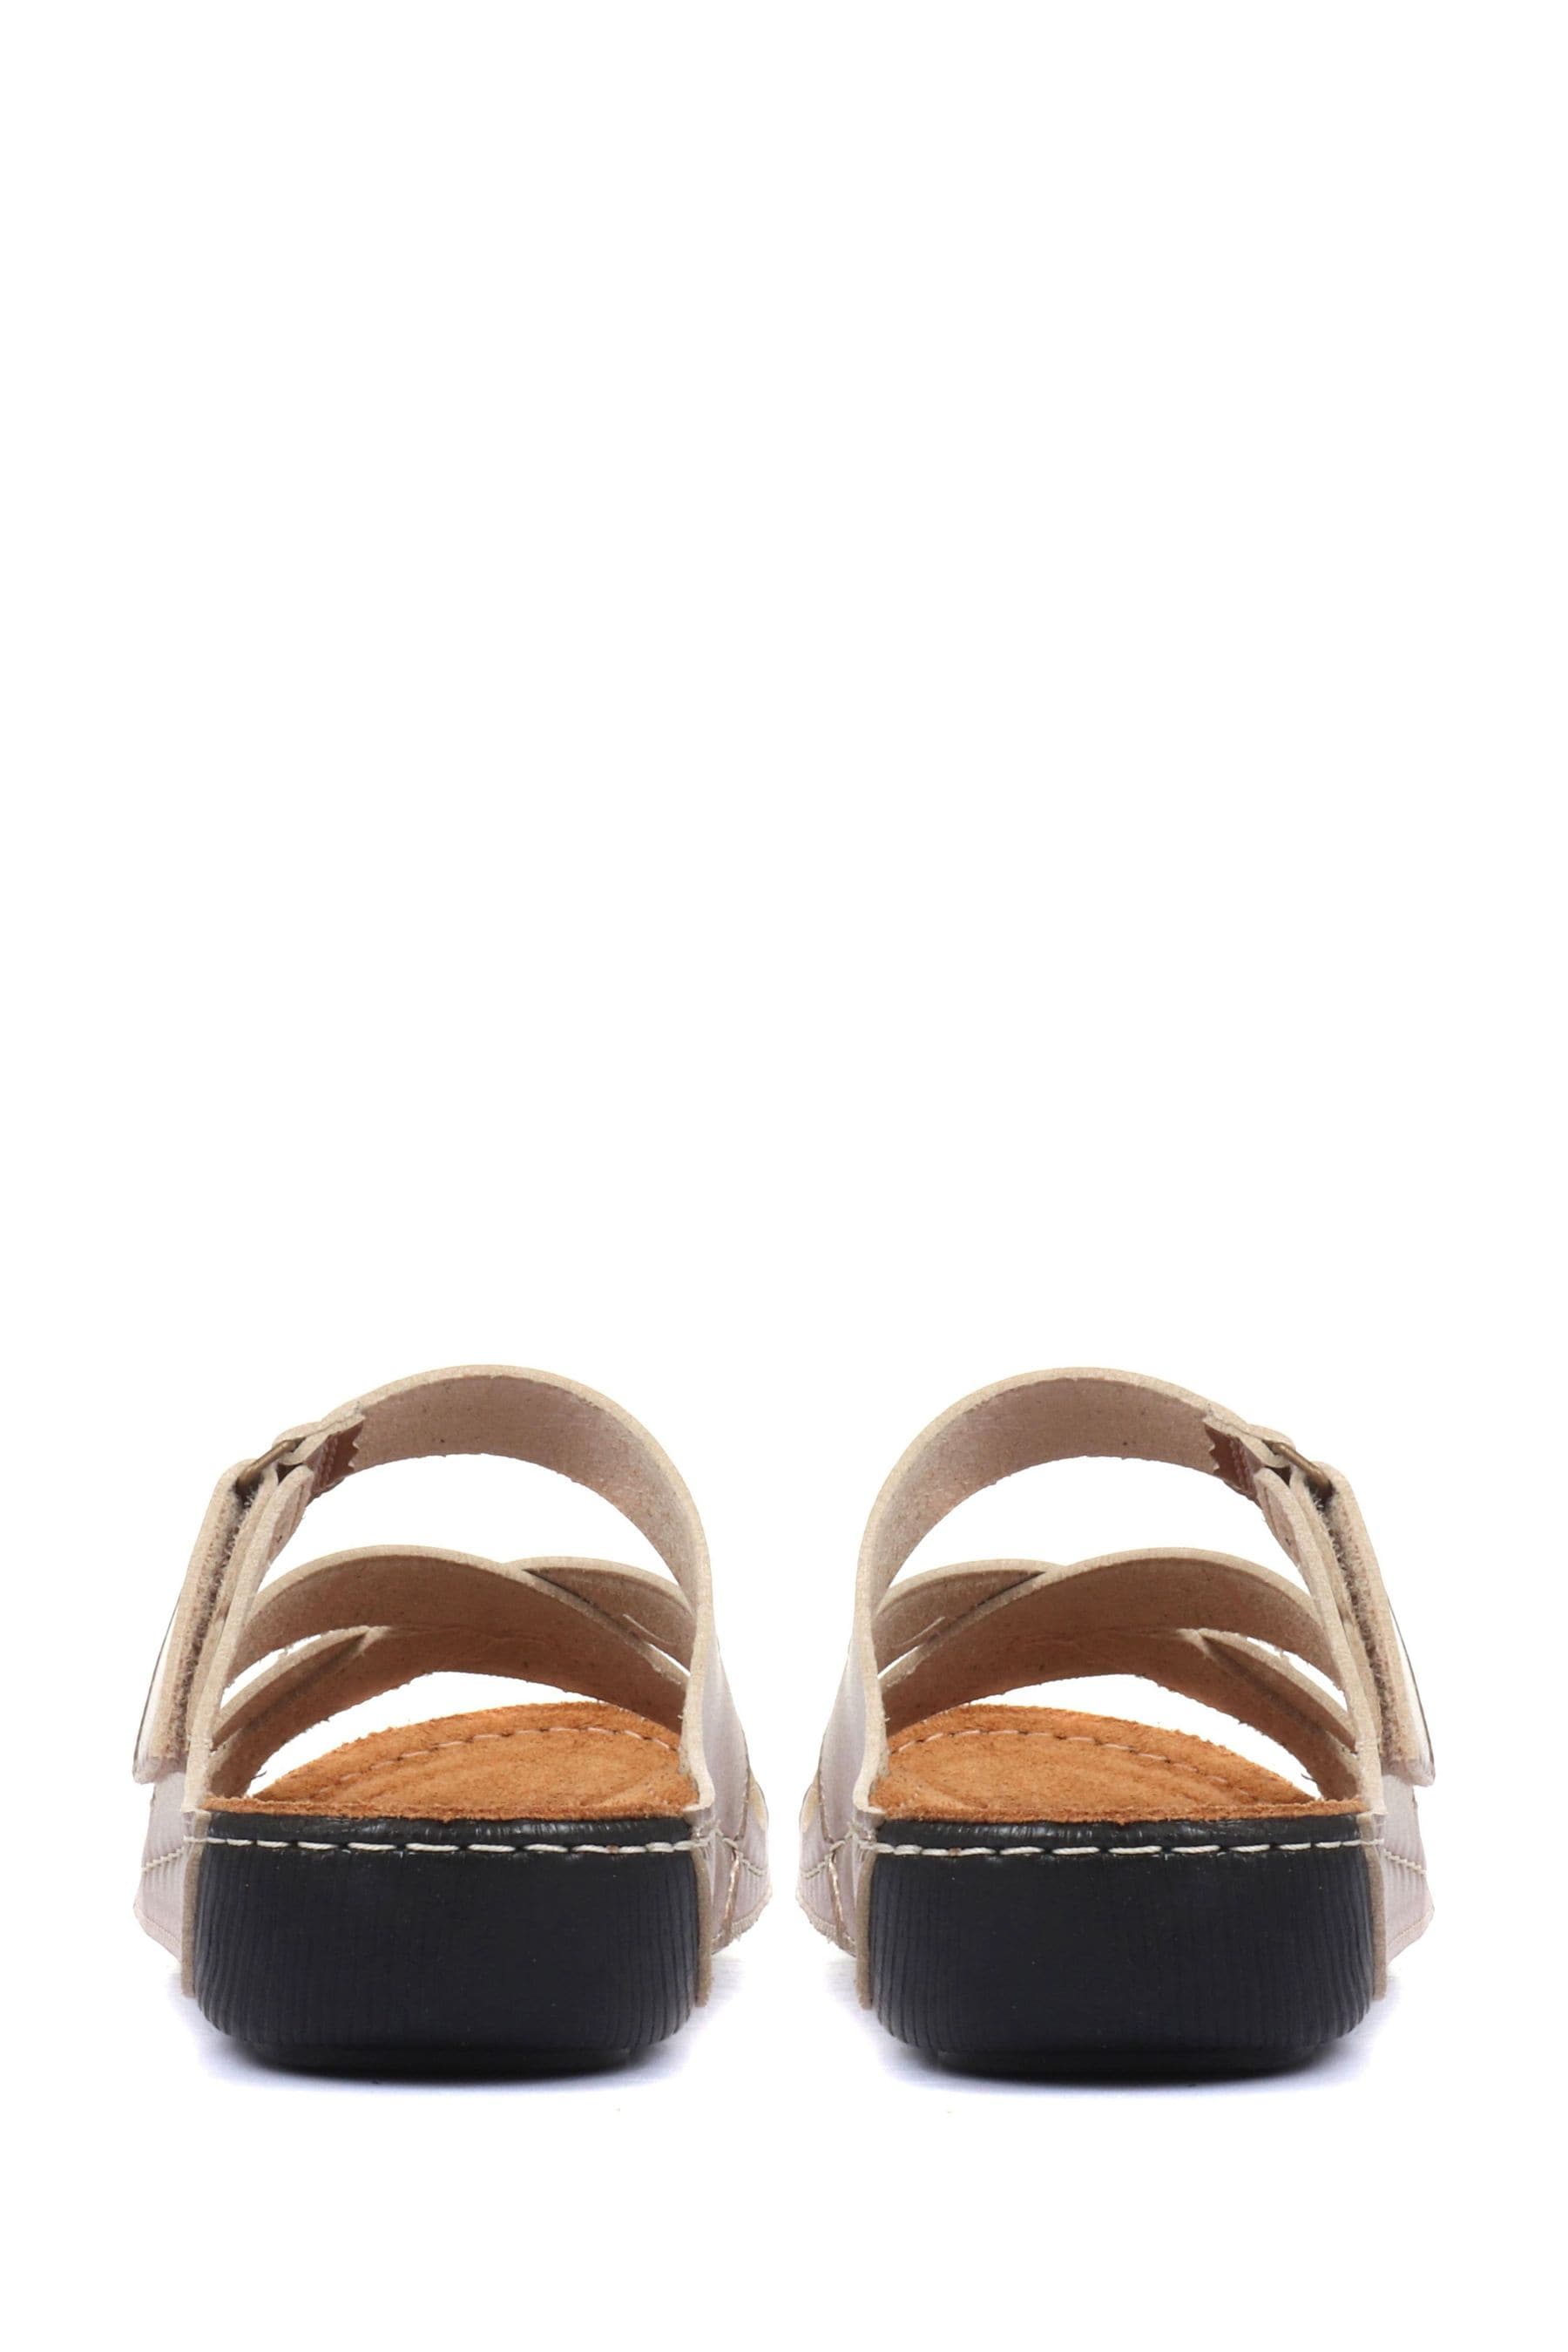 Buy Pavers Natural Ladies Touch Fasten Mules from the Next UK online shop